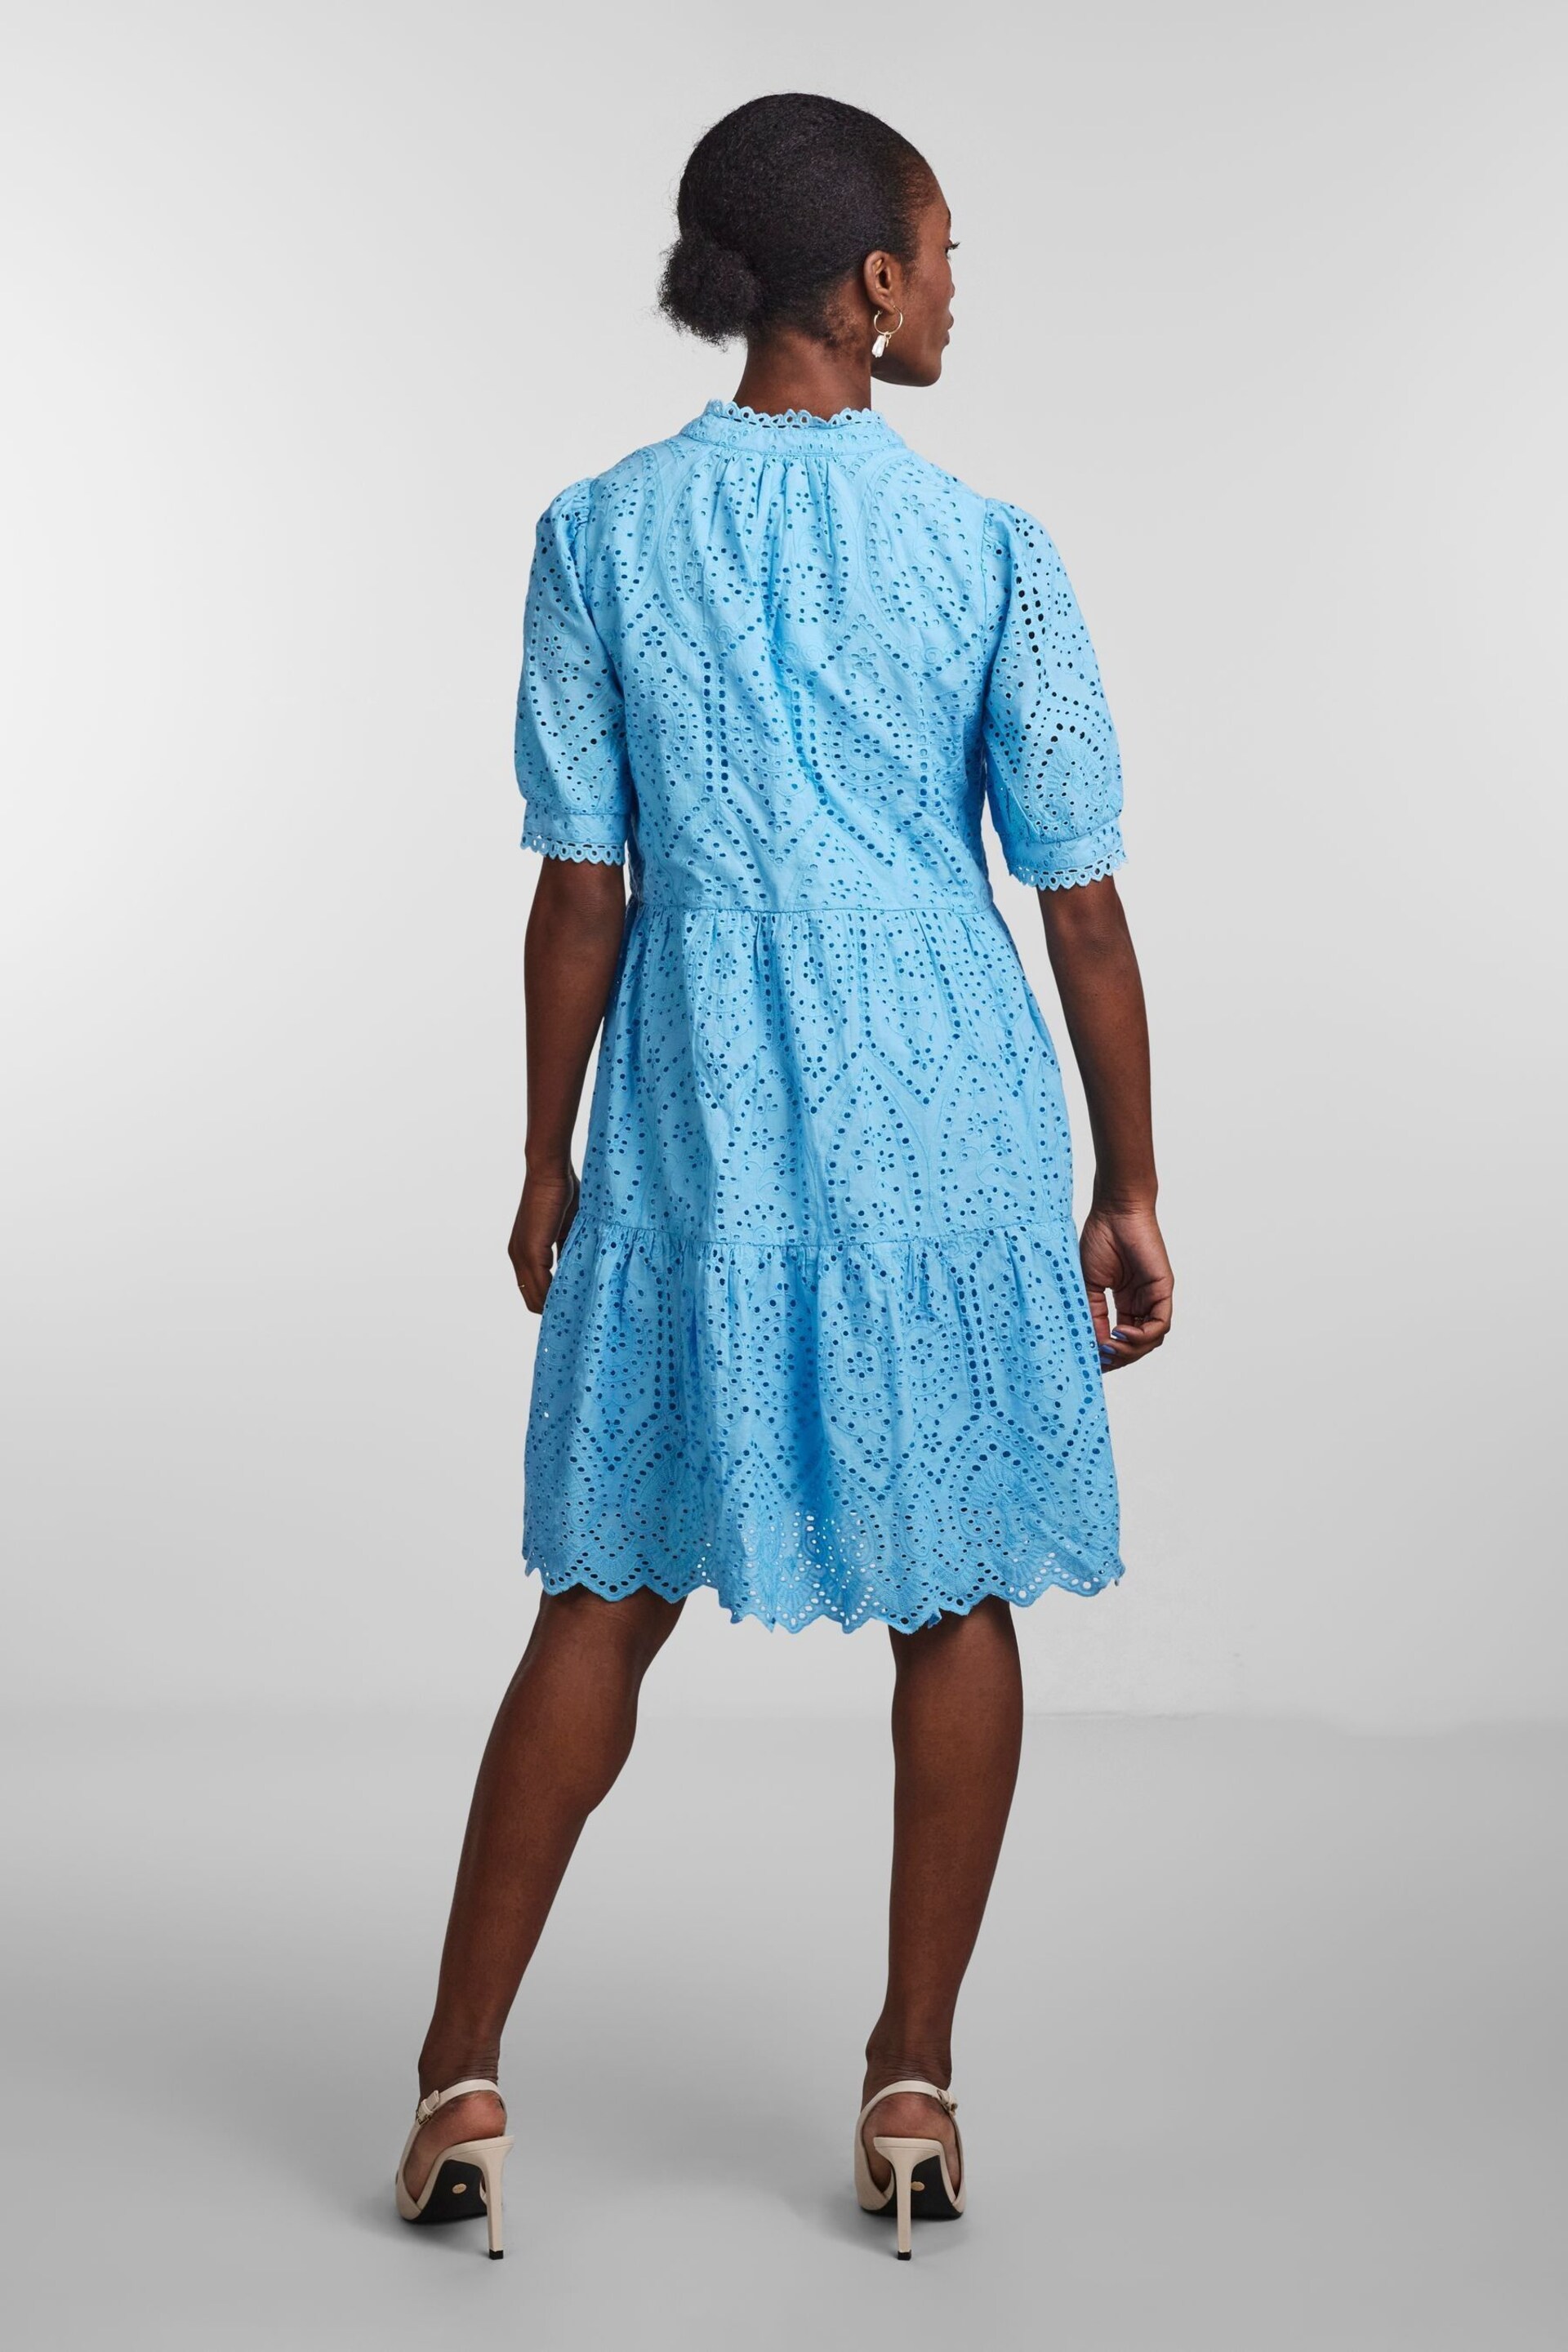 Y.A.S Blue Short Sleeve Broiderie Tiered Dress - Image 3 of 5